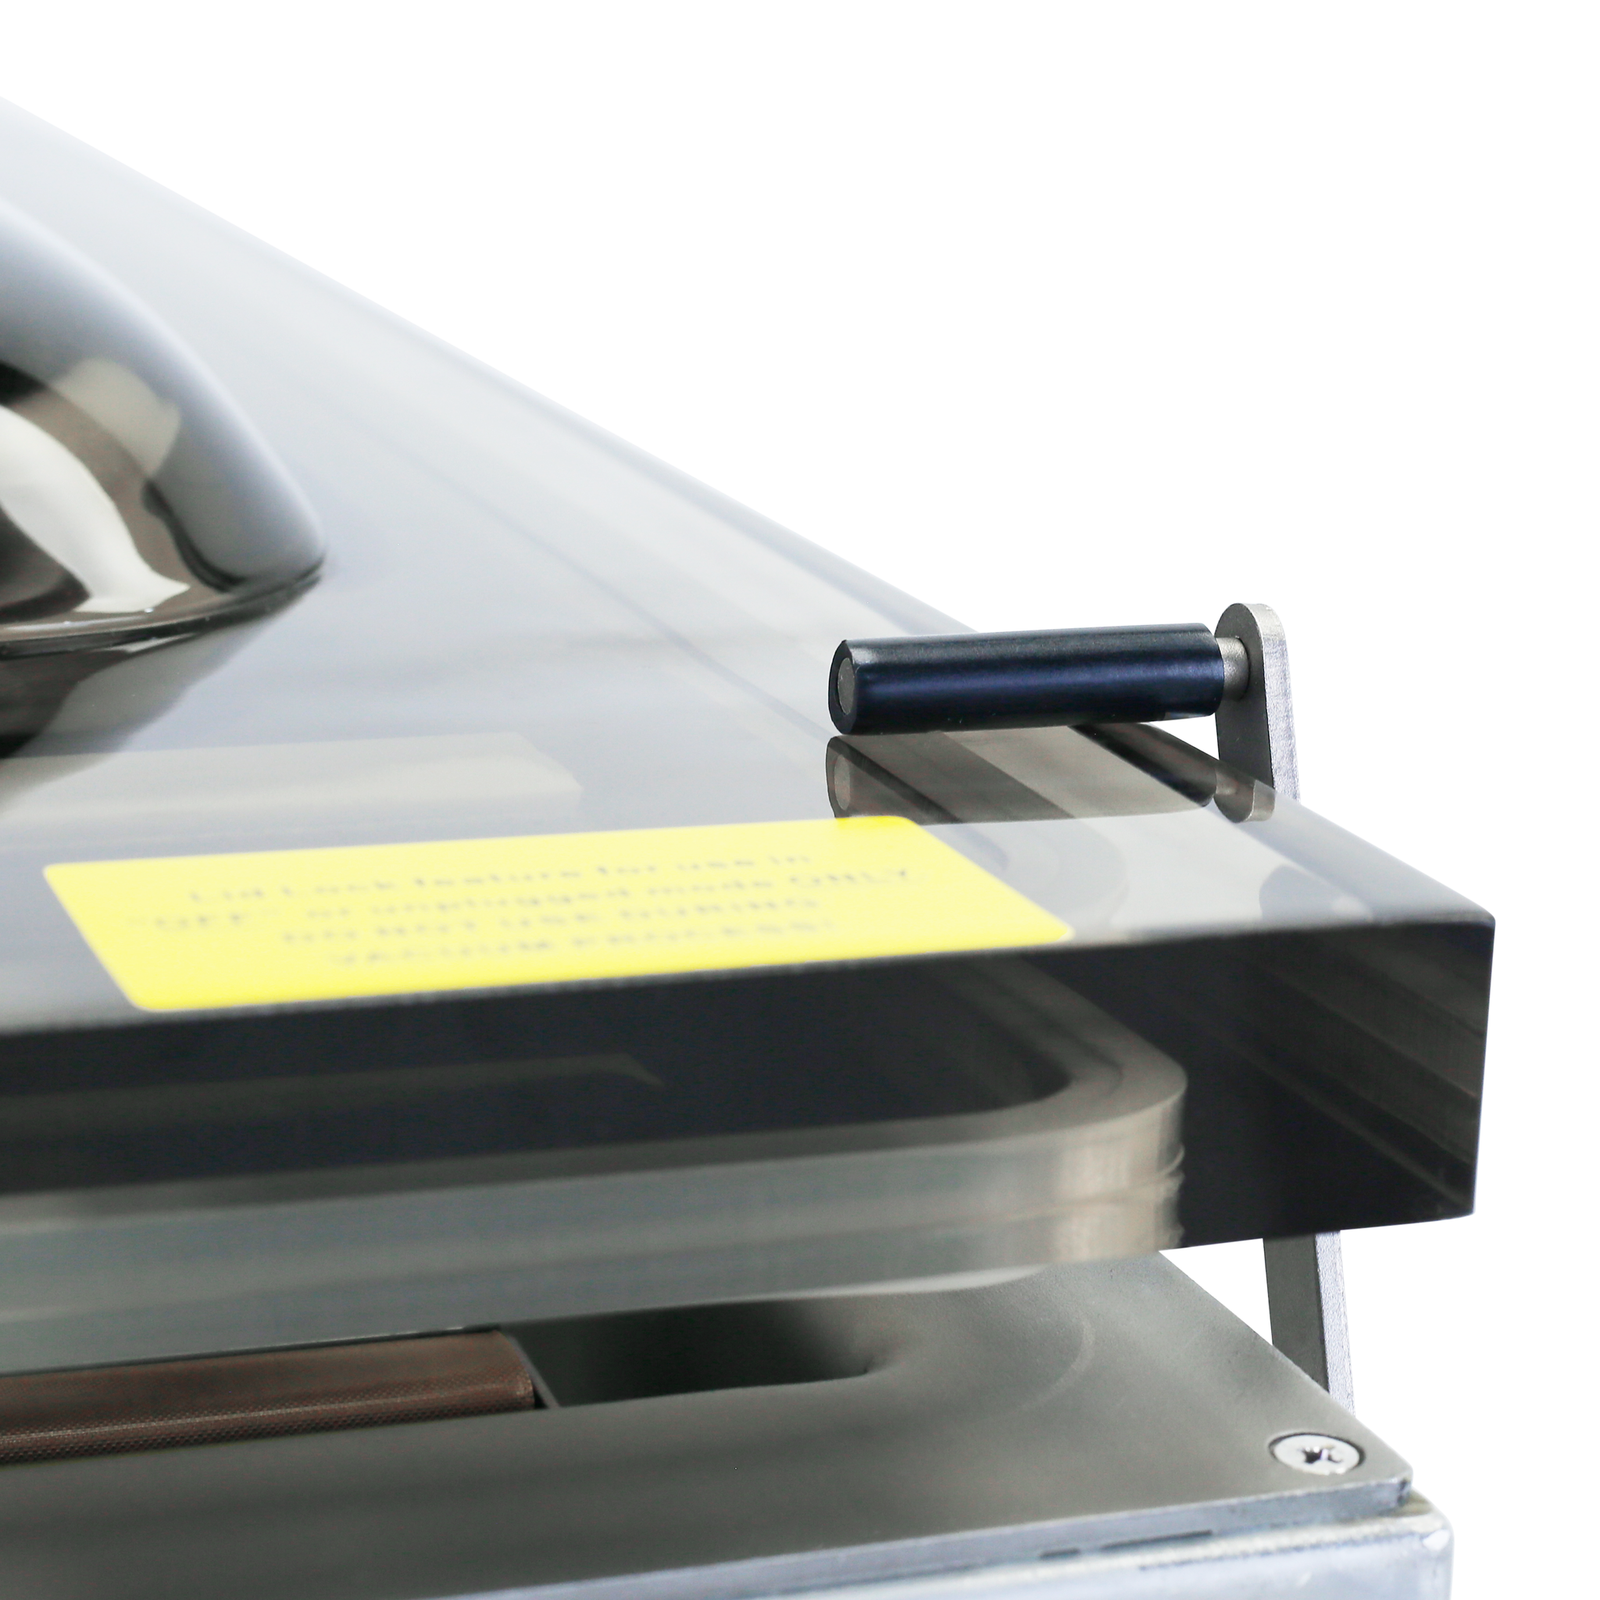 The lid of the JORES TECHNOLOGIES® single chamber vacuum sealer in a closed position. It also shows the bracket that holds the lid down